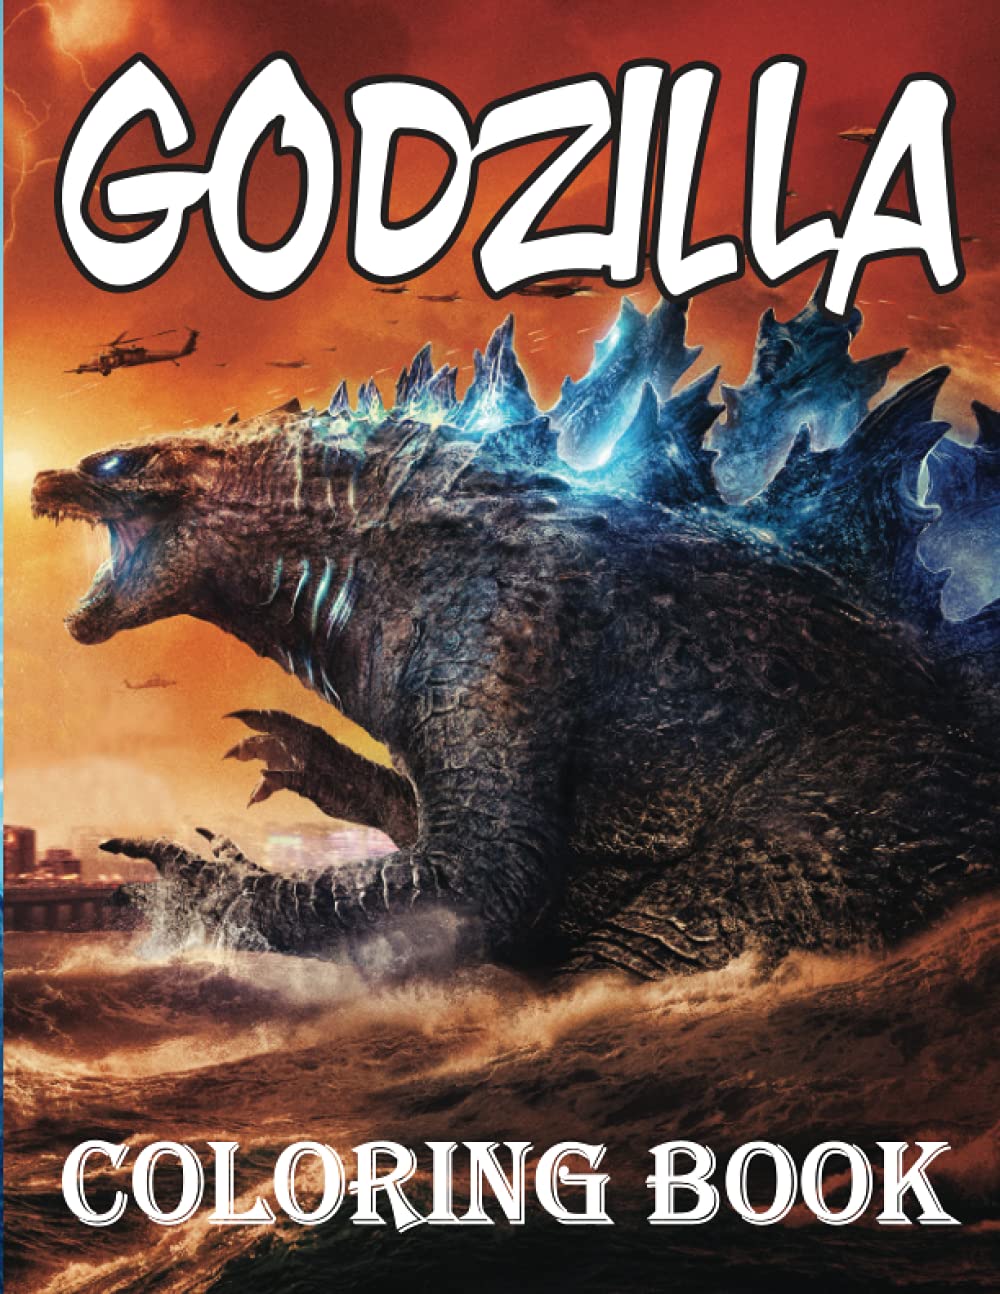 Godzilla coloring book for kids and adults a great gift for boys girls of all ages by akhlas coloring book publishing